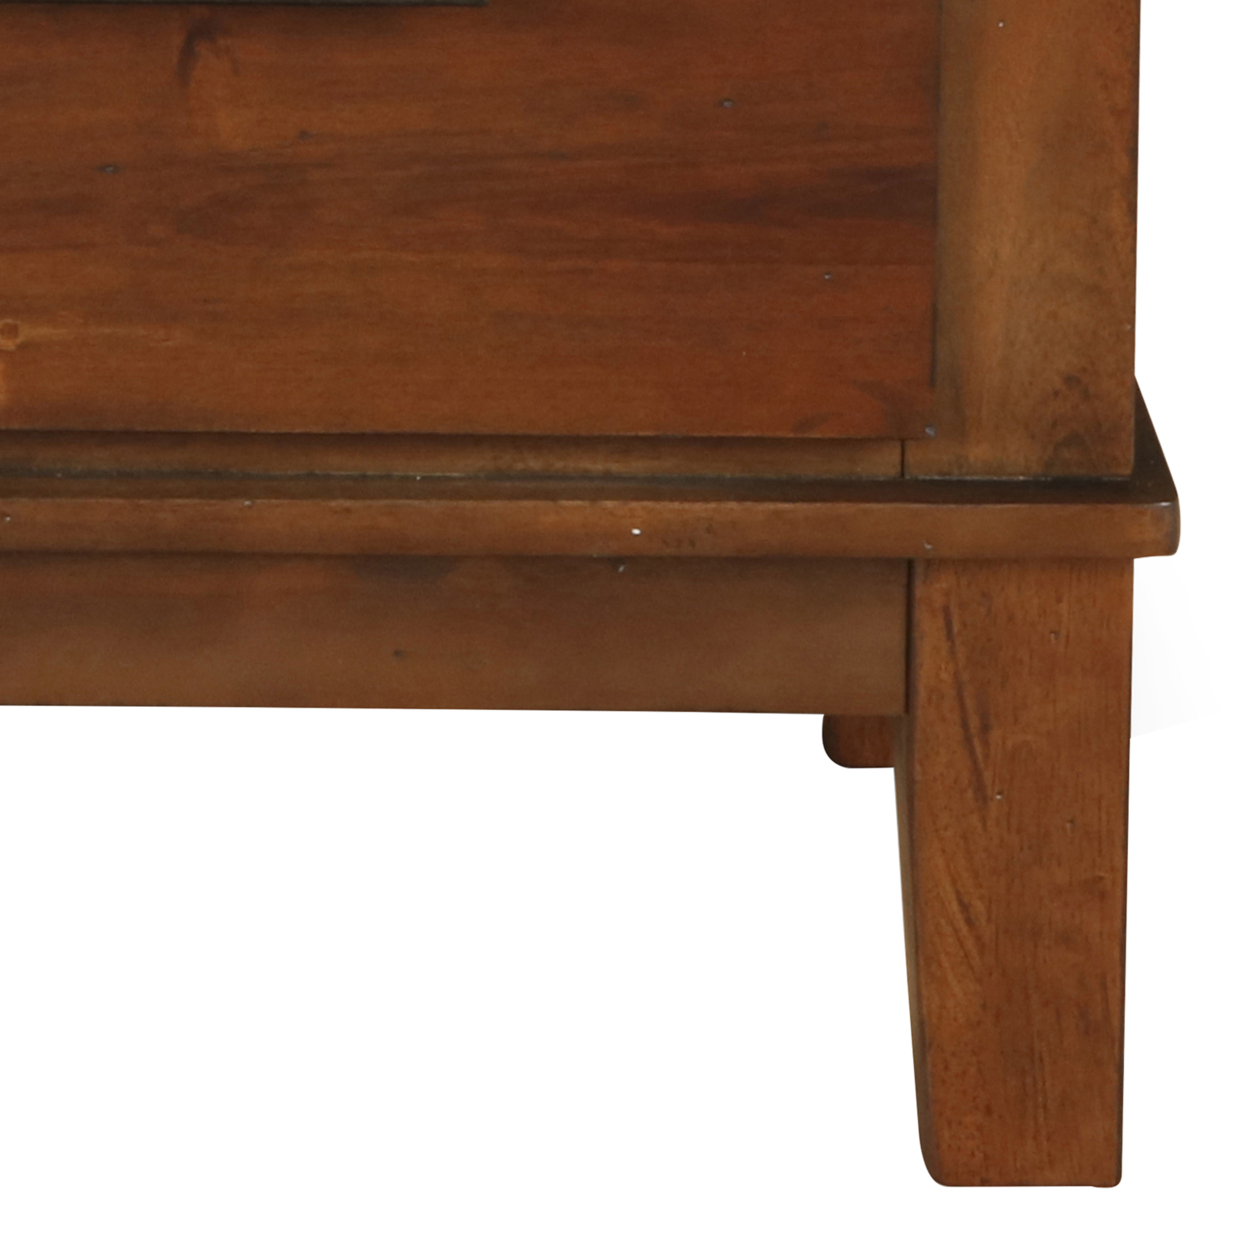 Wooden Nightstand With Chamfered Legs And 2 Spacious Drawers, Brown- Saltoro Sherpi